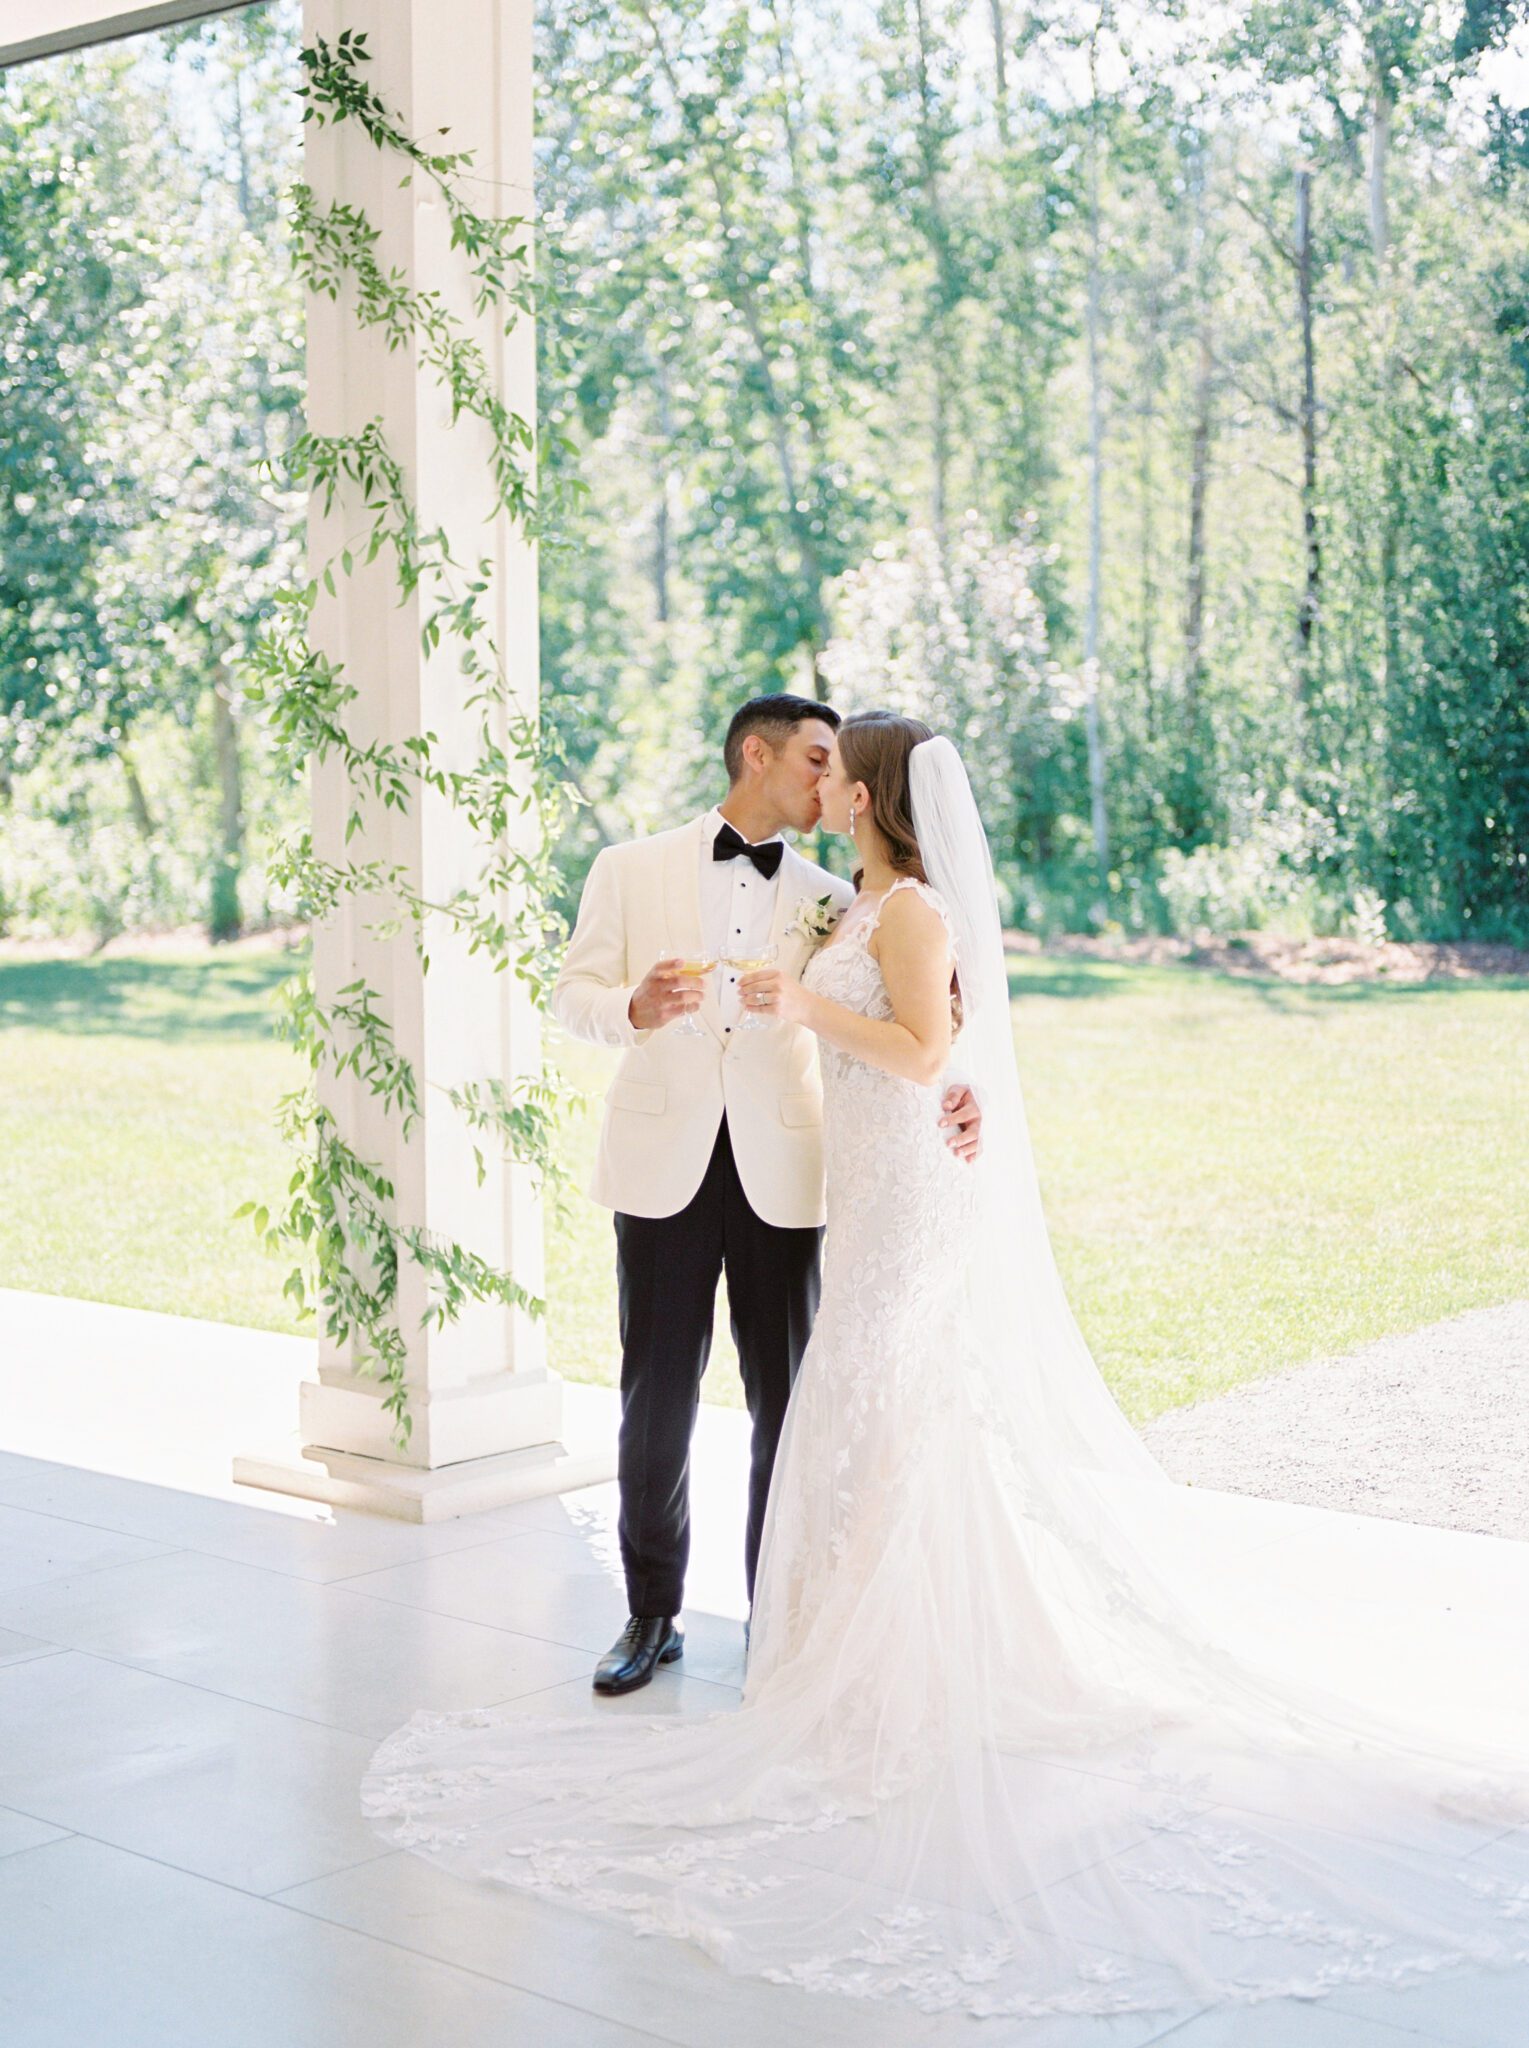 Elegant bride and groom embracing on patio at Sparrow Lane Events in Alberta. Classic colour palette of white, blush, and green wedding inspiration.